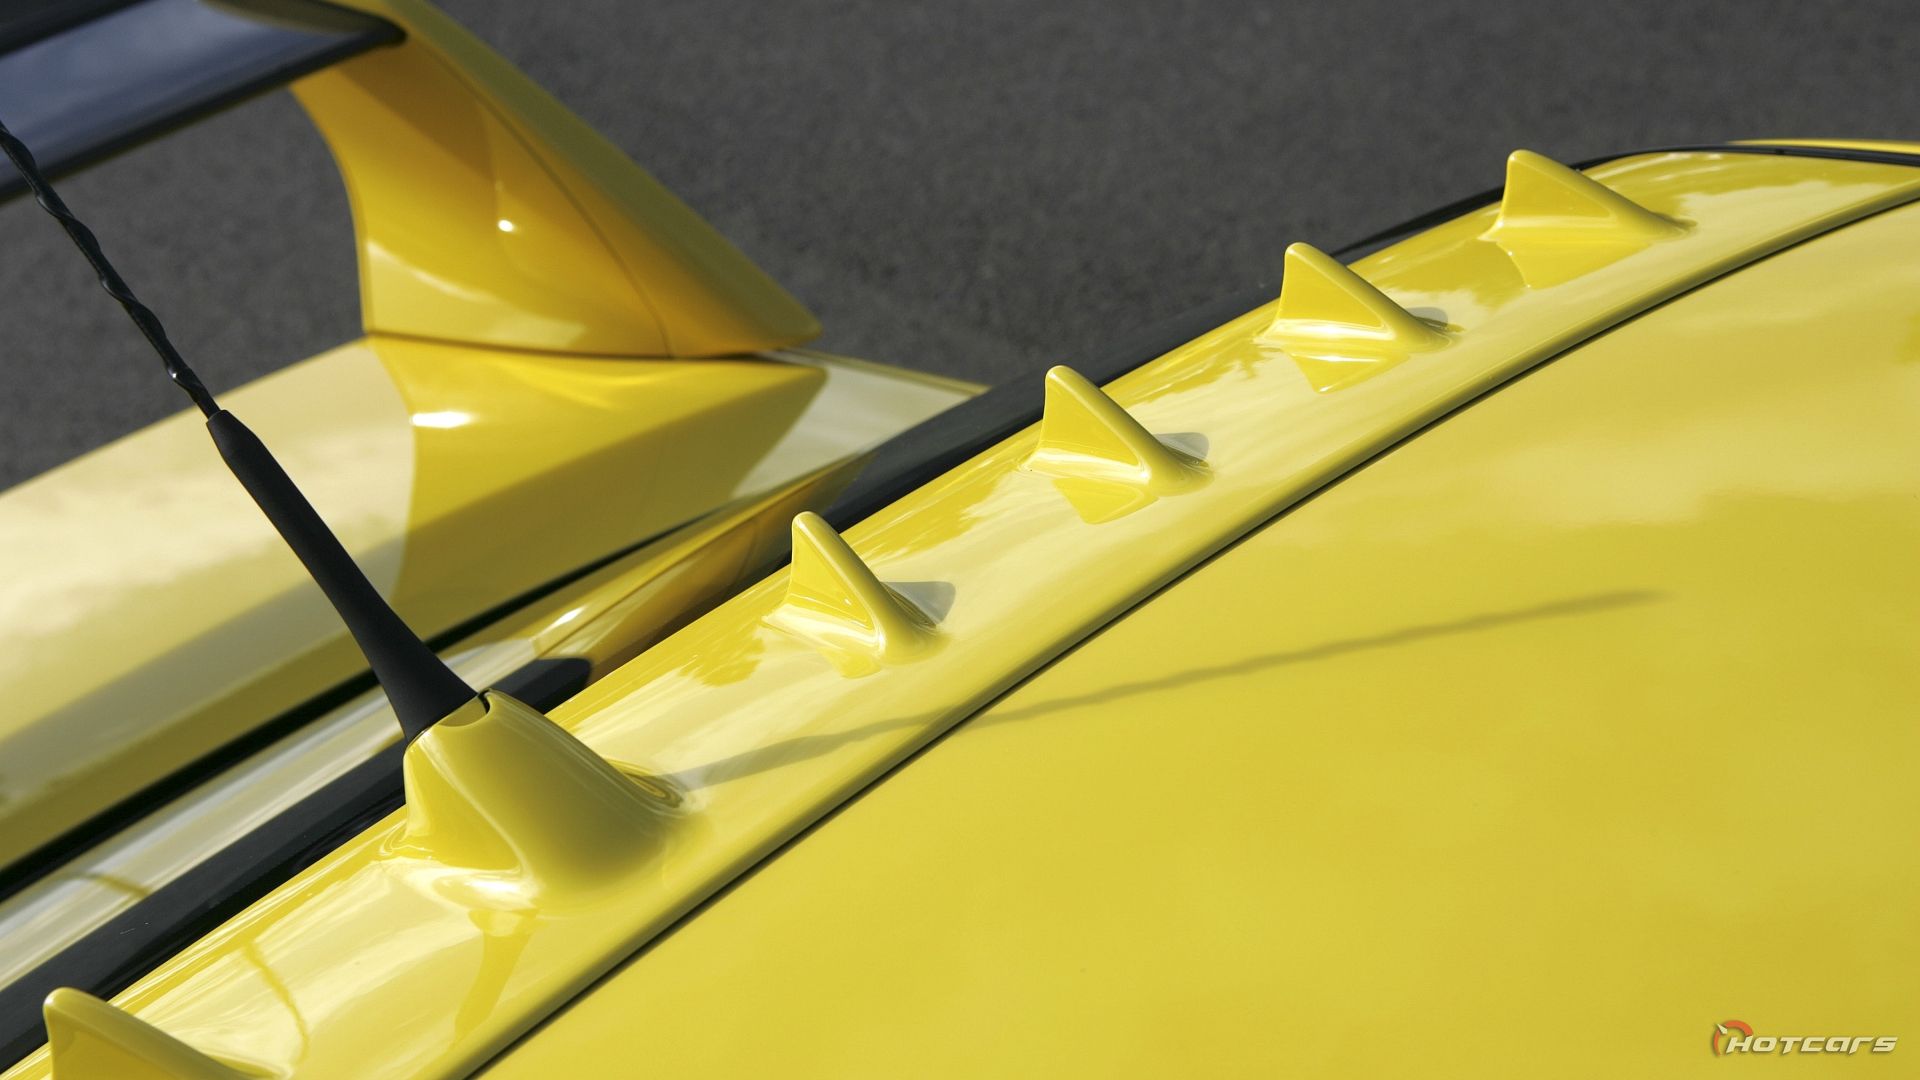 HotCars Explains: Vortex Generators — What They Can And Can't Do!